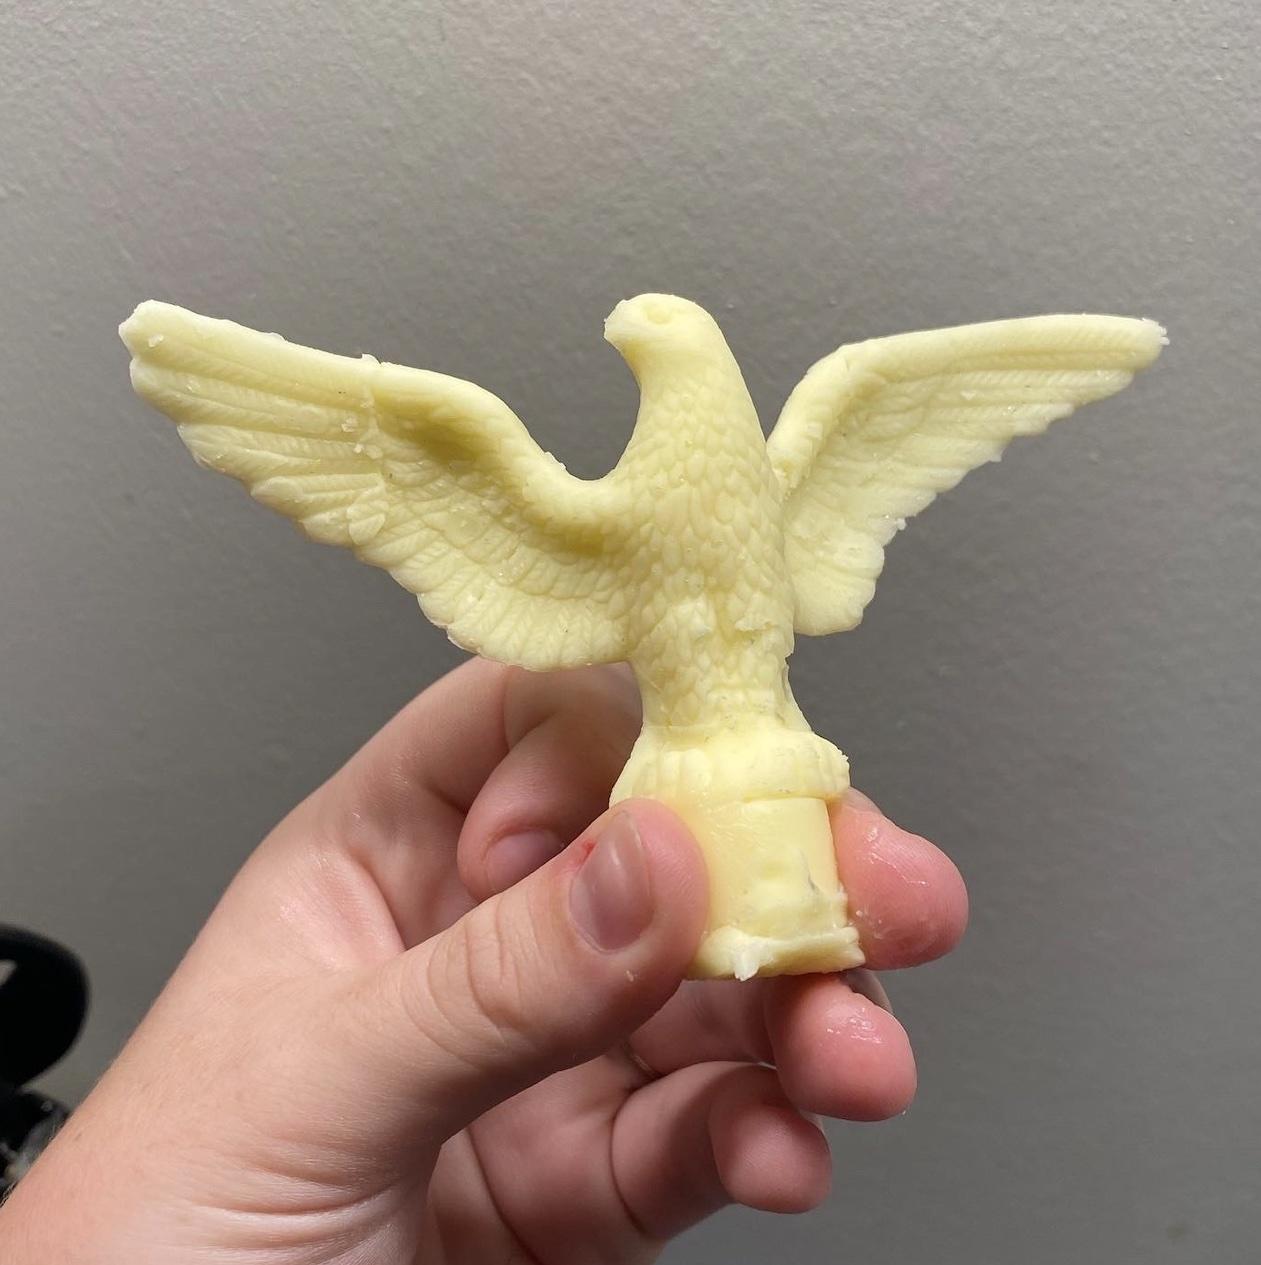 A white person's hand holds a miniature American eagle made of butter. 